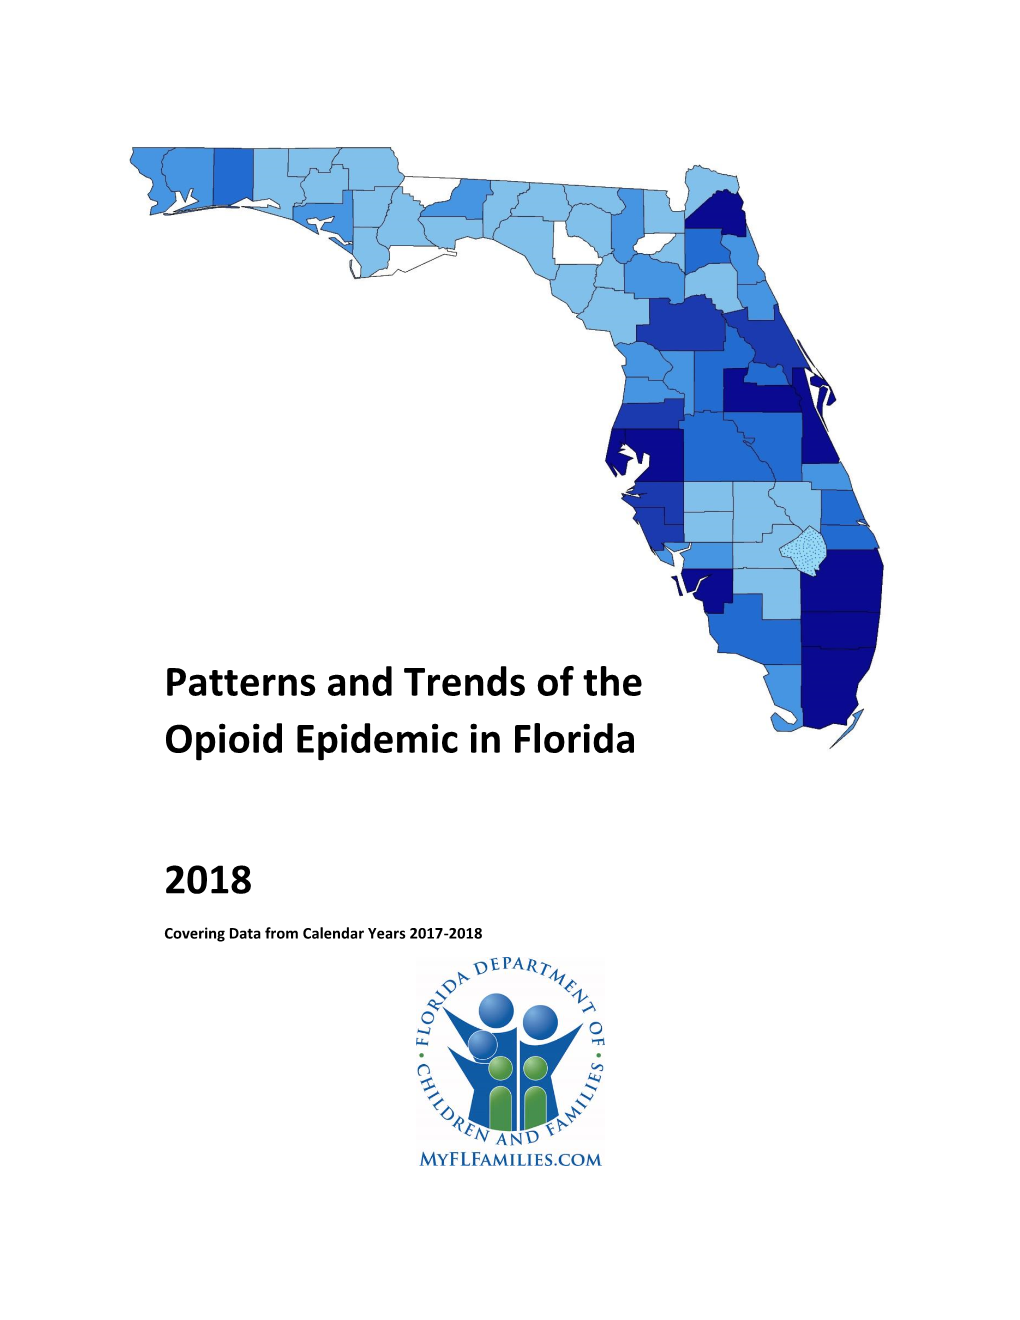 Patterns and Trends of the Opioid Epidemic in Florida 2018